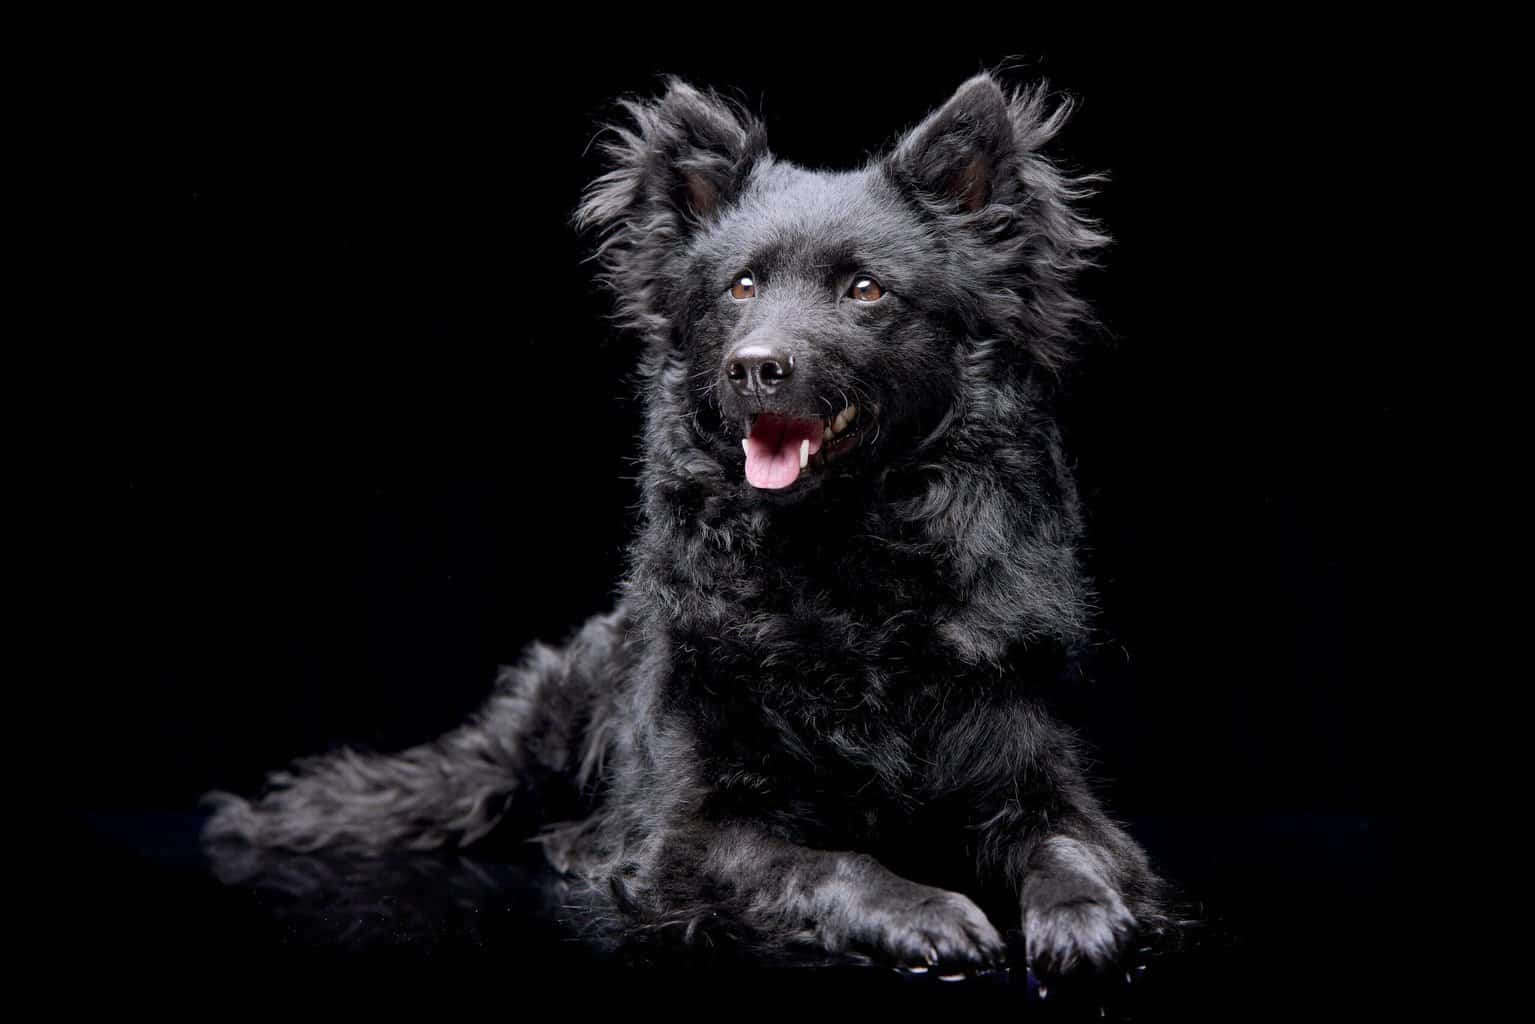 Mudi dog on black background. The Mudi dog breed is a spunky little farm dog is praised for its intelligence, eagerness, and versatility.